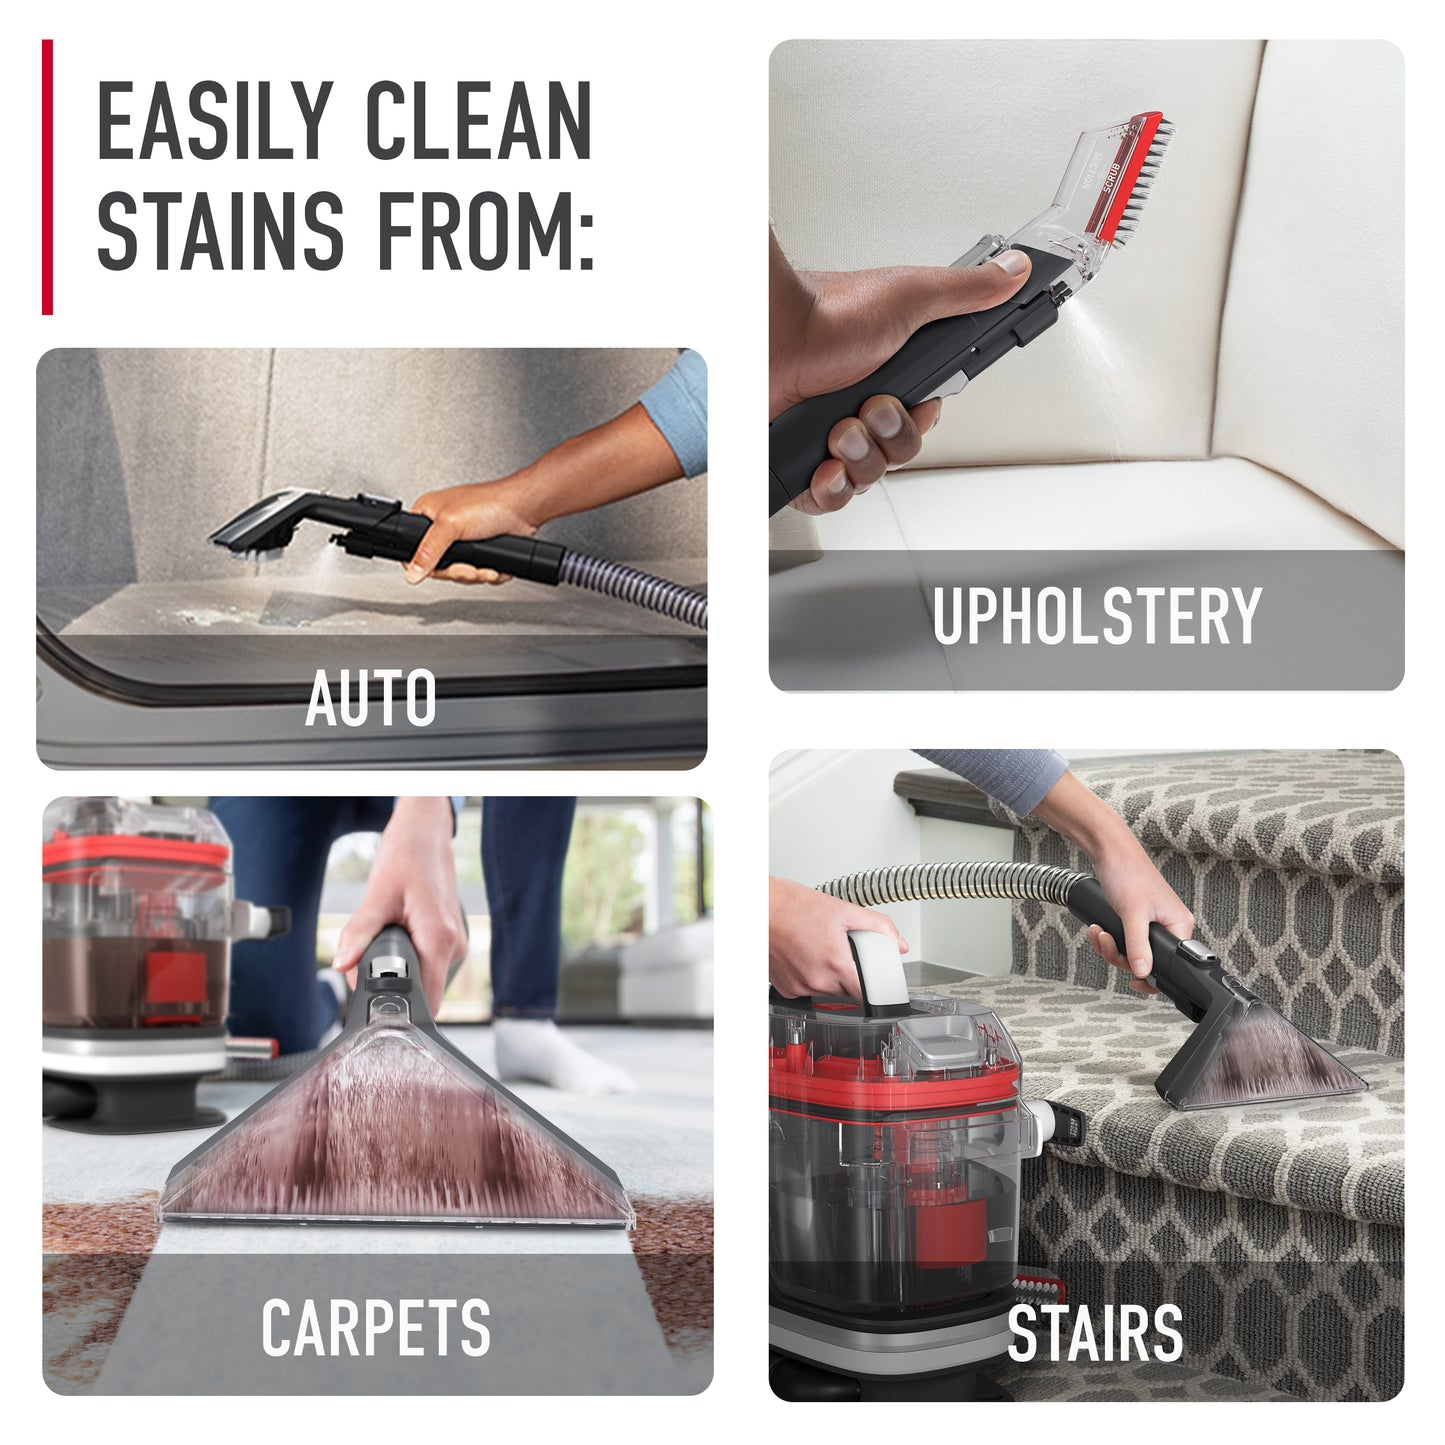 Cleanslate pet portable spot cleaner is shown being used to clean a car interior, white upholstery, light grey carpets, and on grey carpeted stairs.